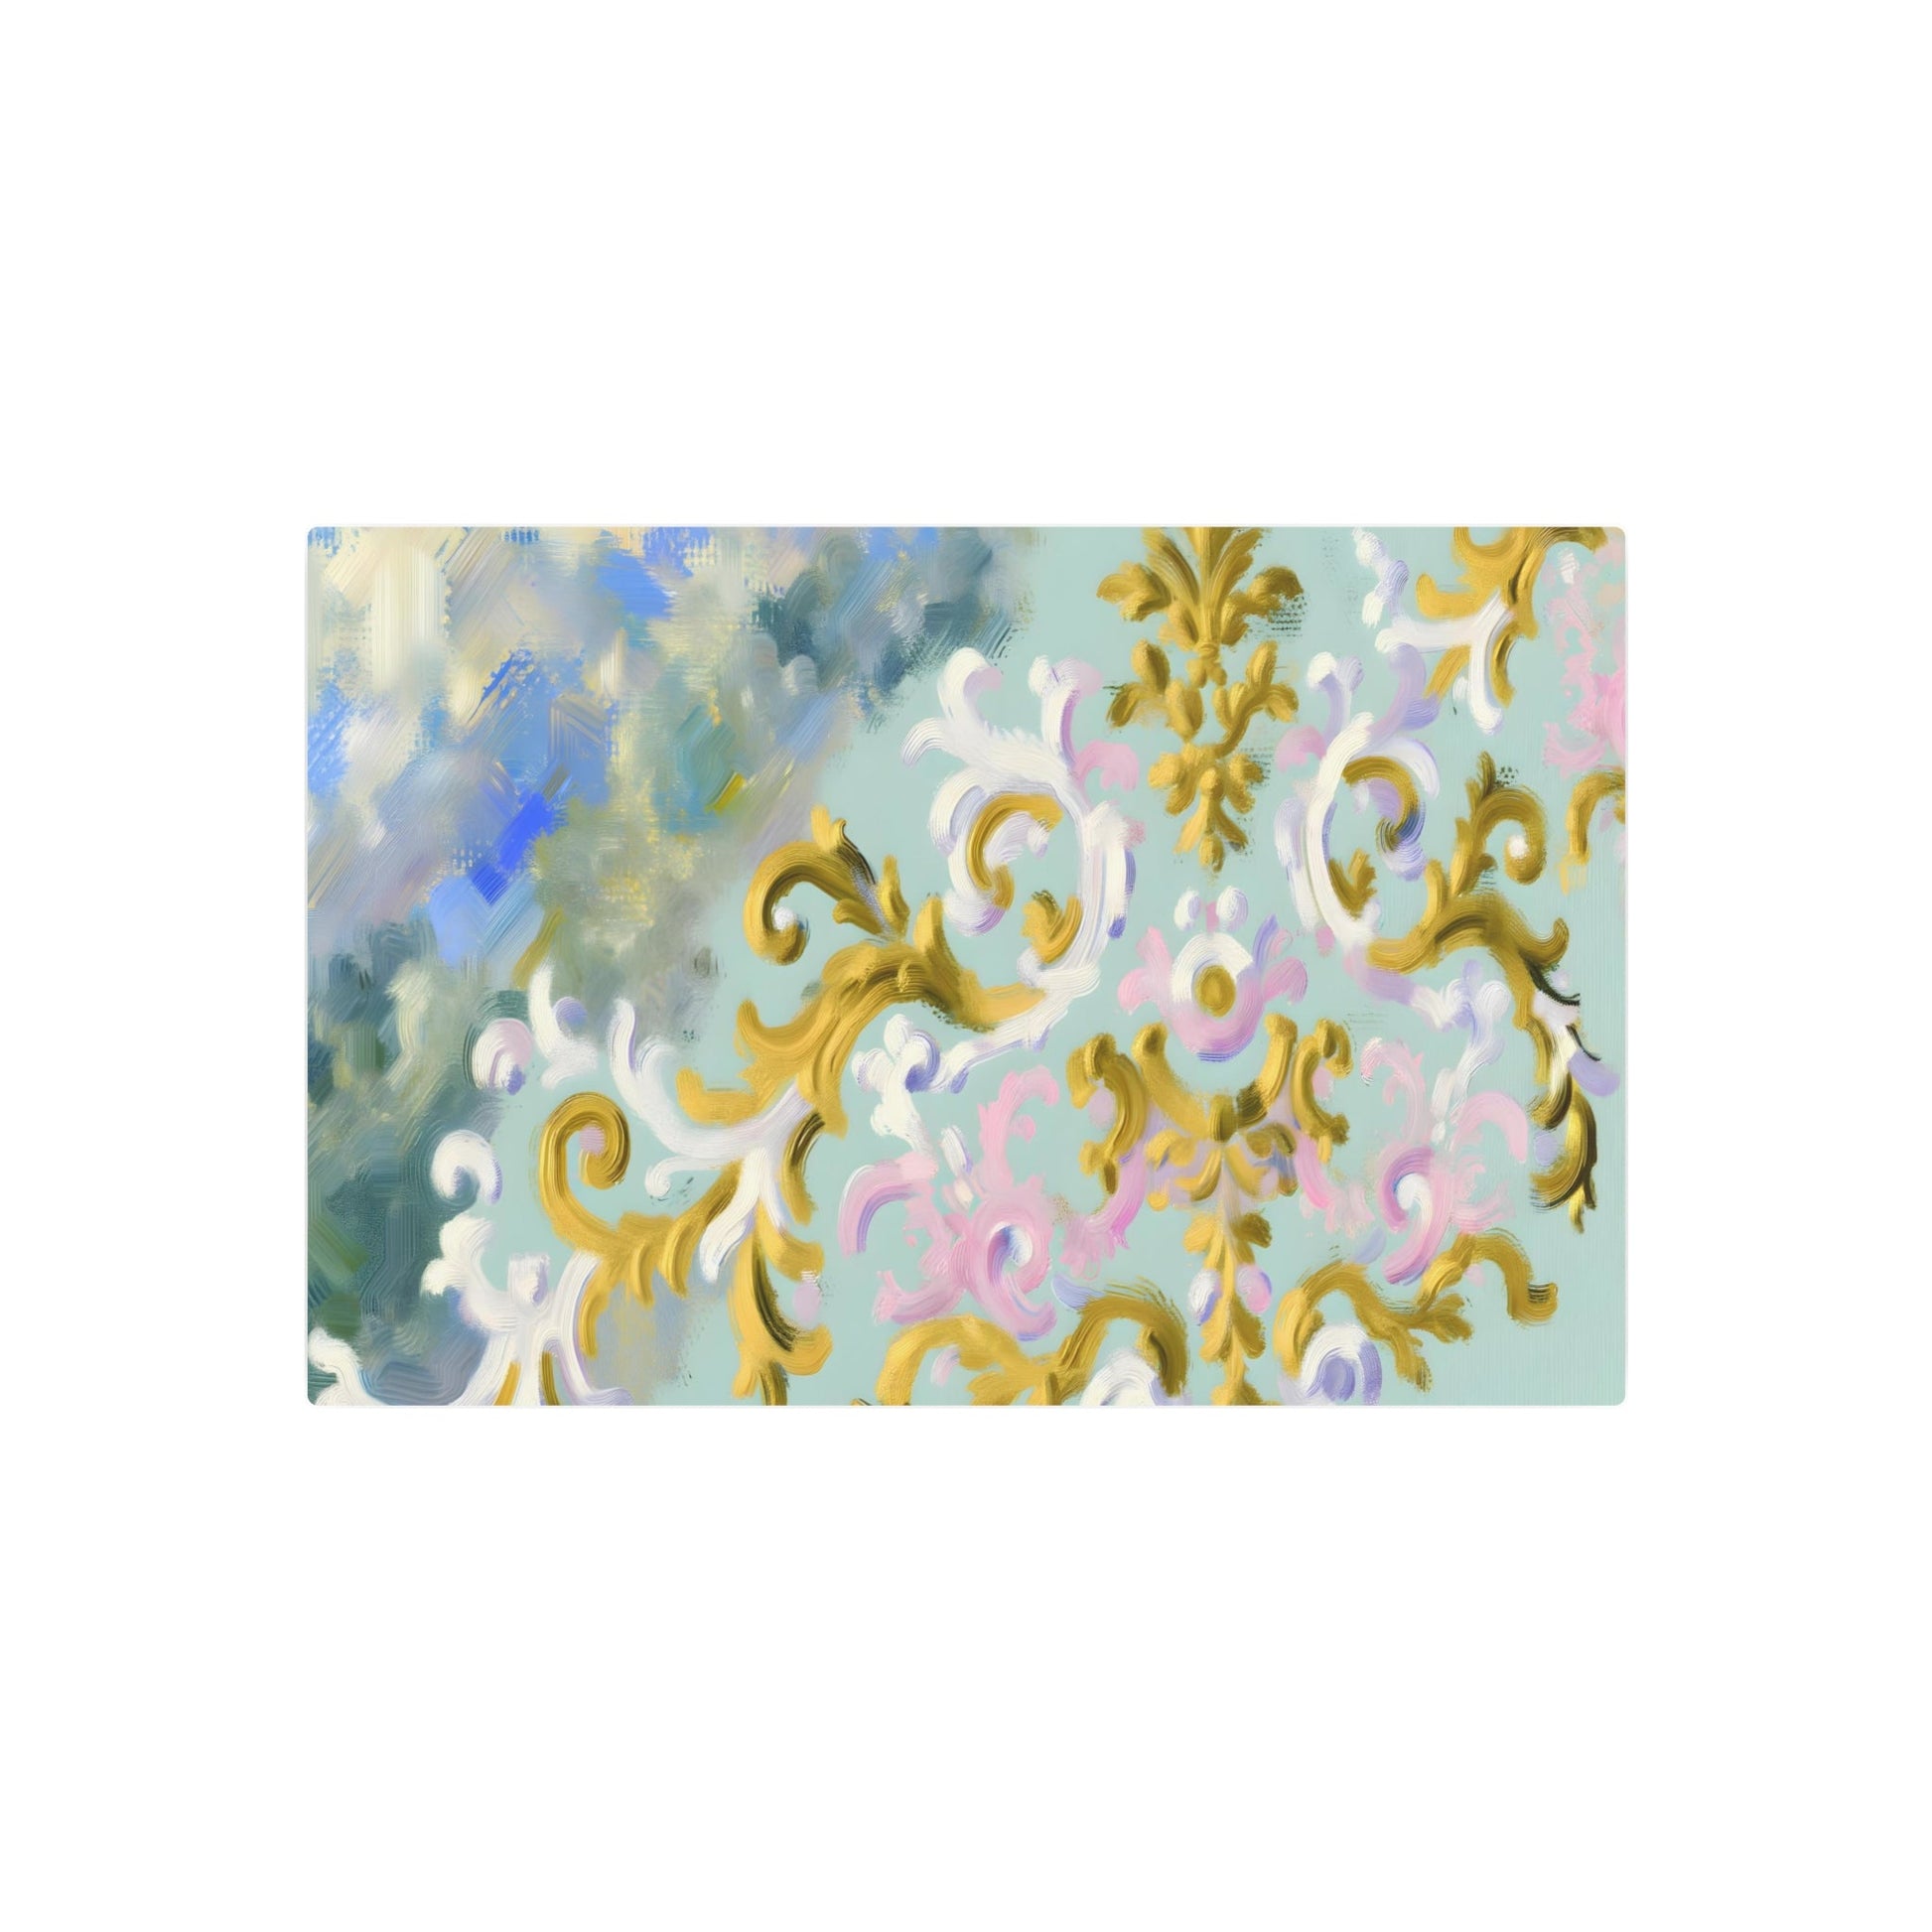 Metal Poster Art | "Rococo Inspired Artwork Featuring Pastel Colors & Gold Accents - Western Art Styles Collection, Evoking the Elegance of François B - Metal Poster Art 30″ x 20″ (Horizontal) 0.12''